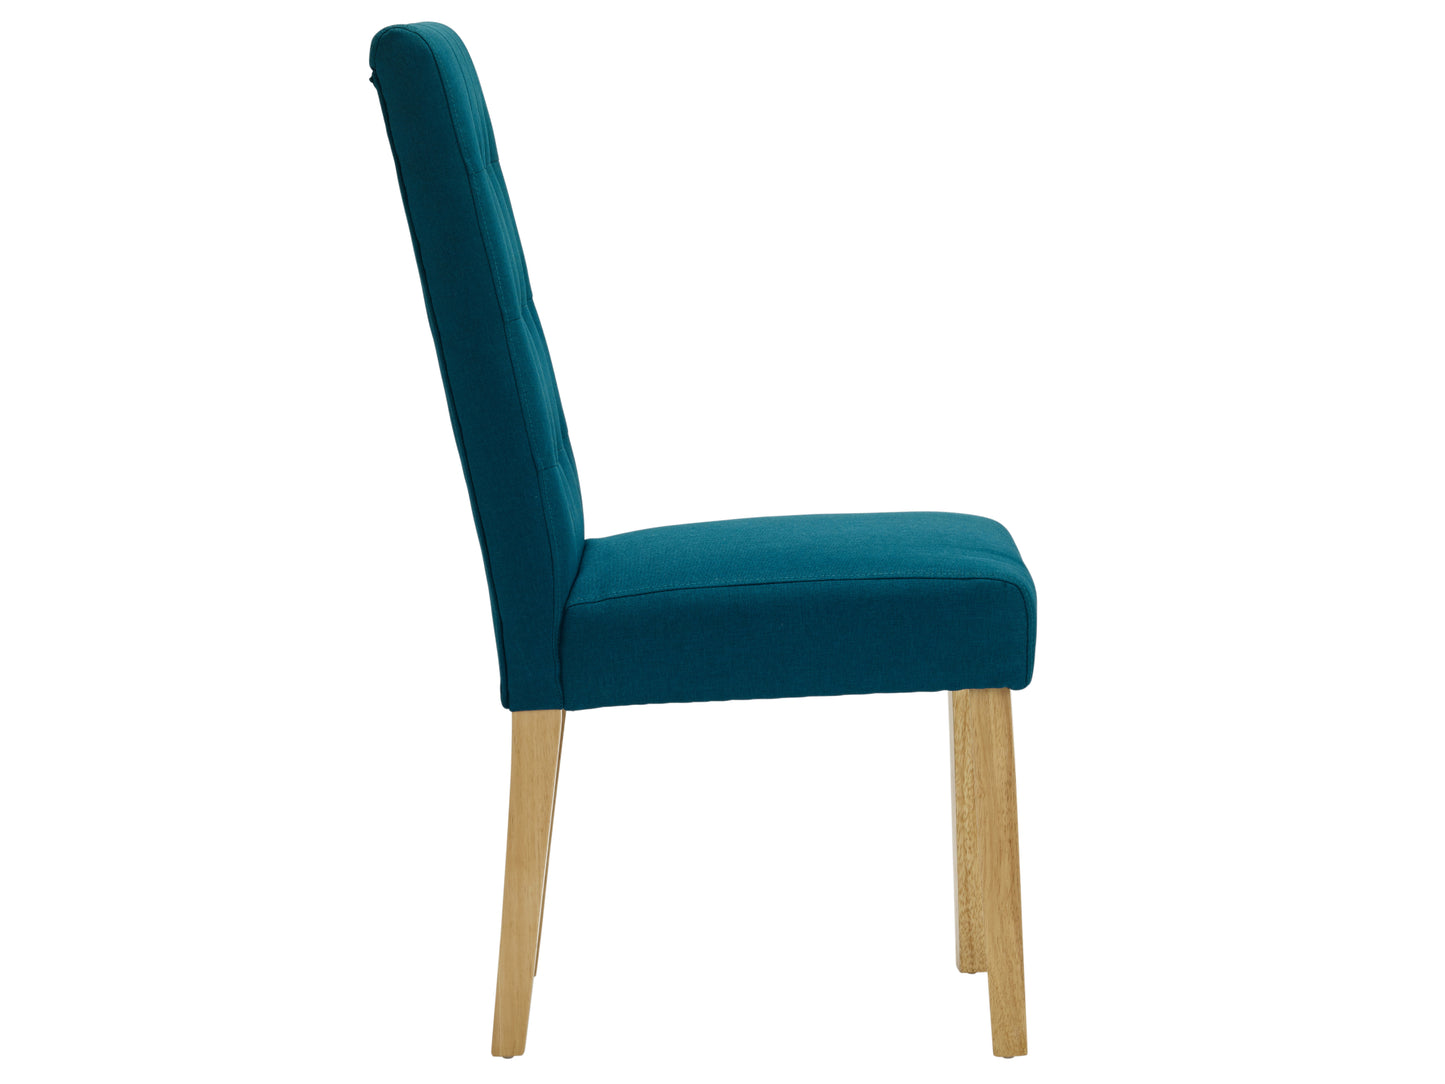 Roma Dining Chair in Teal (2 Pack)